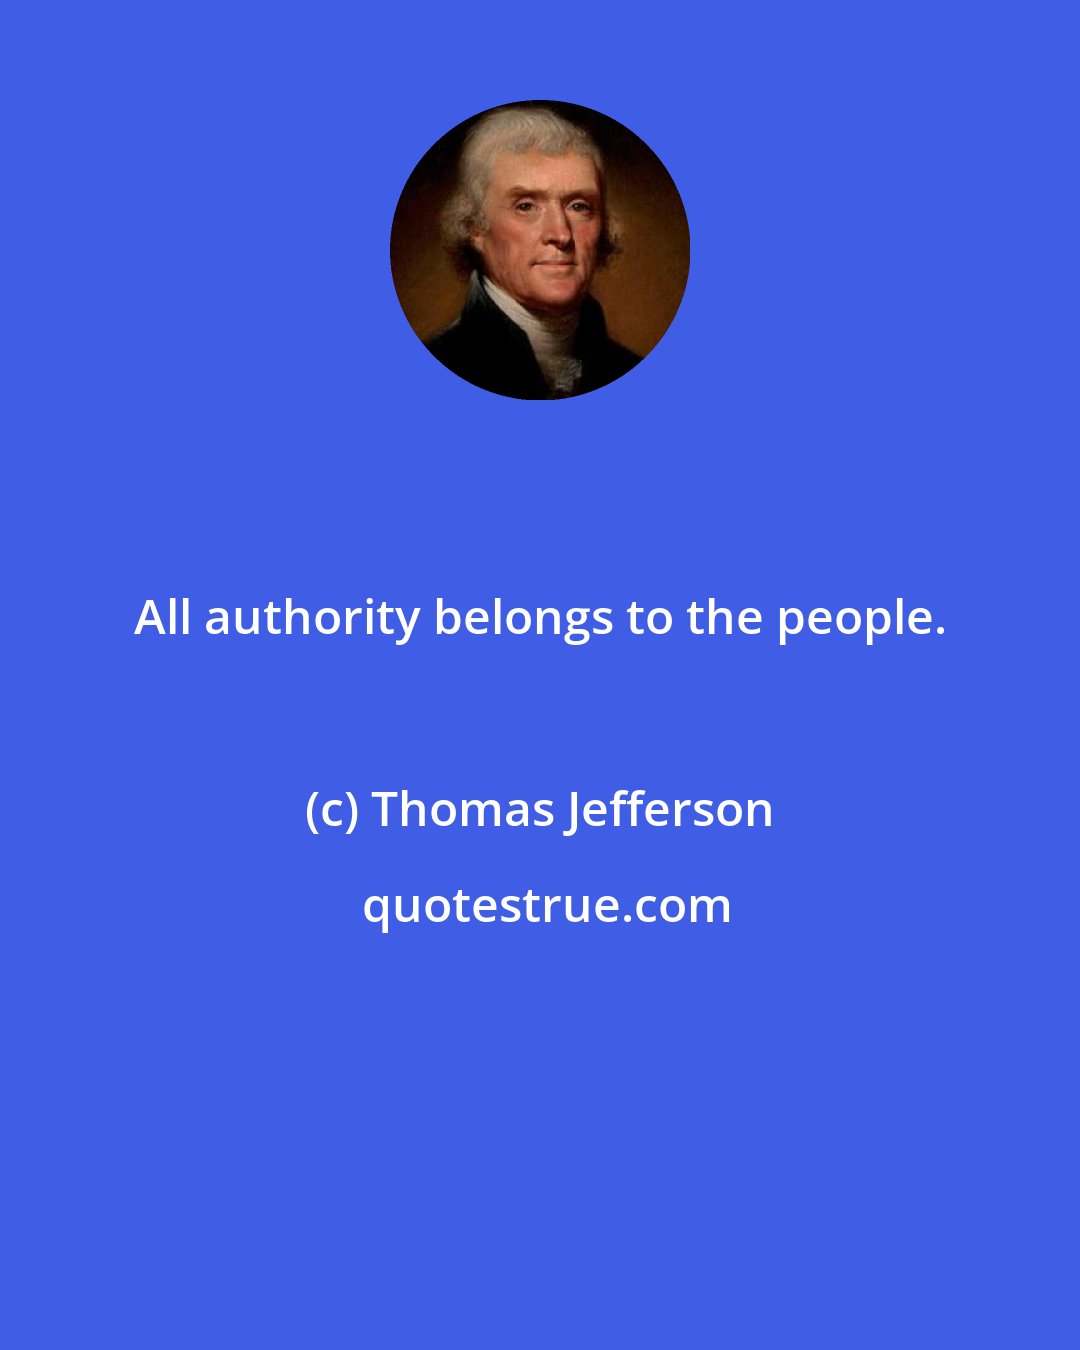 Thomas Jefferson: All authority belongs to the people.